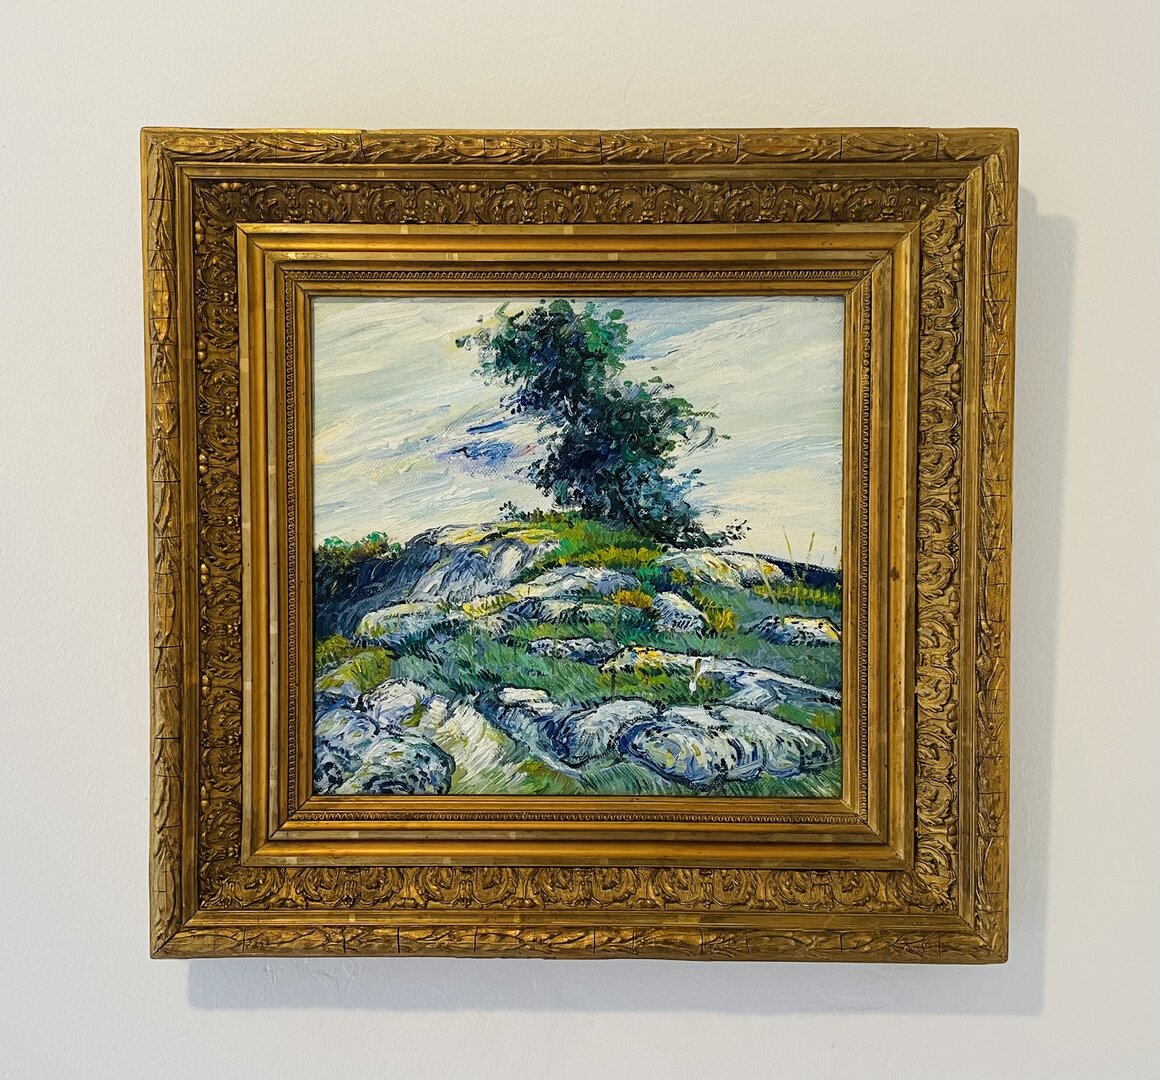 small replica of Van Gogh's Rocks with Oak Tree with antique frame